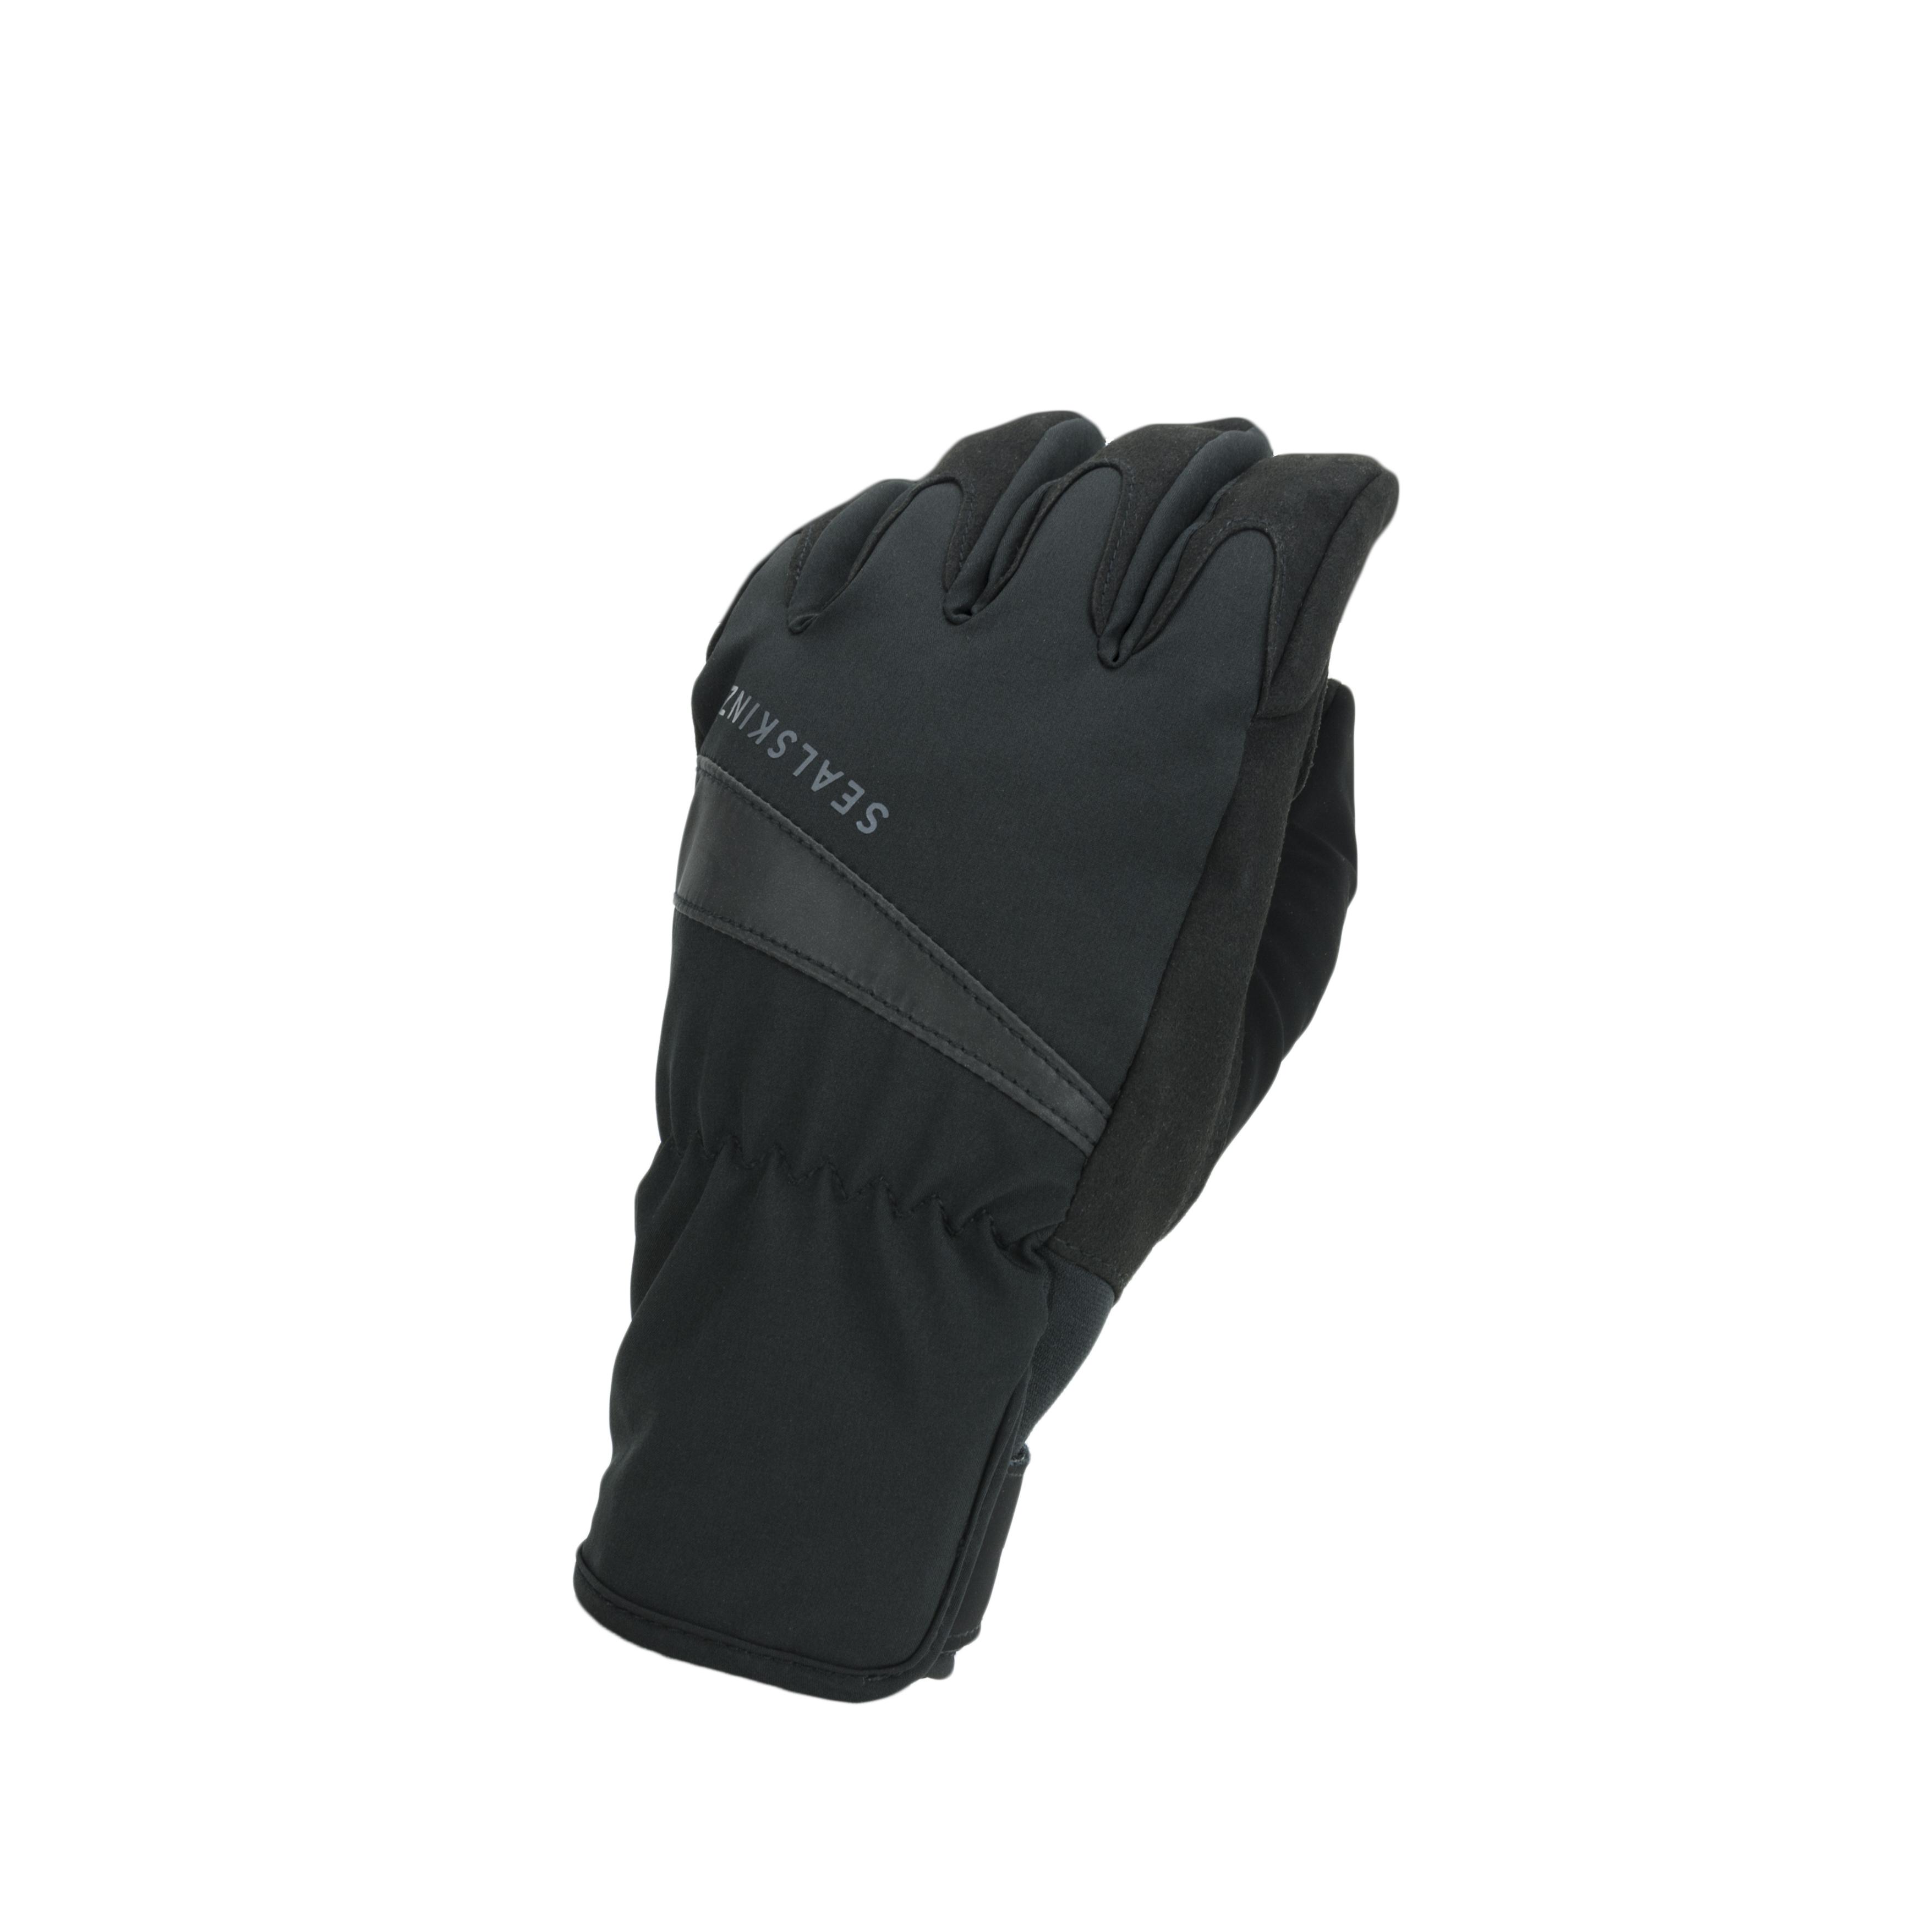 Sealskinz Womens All Weather Cycle Glove, Black - L